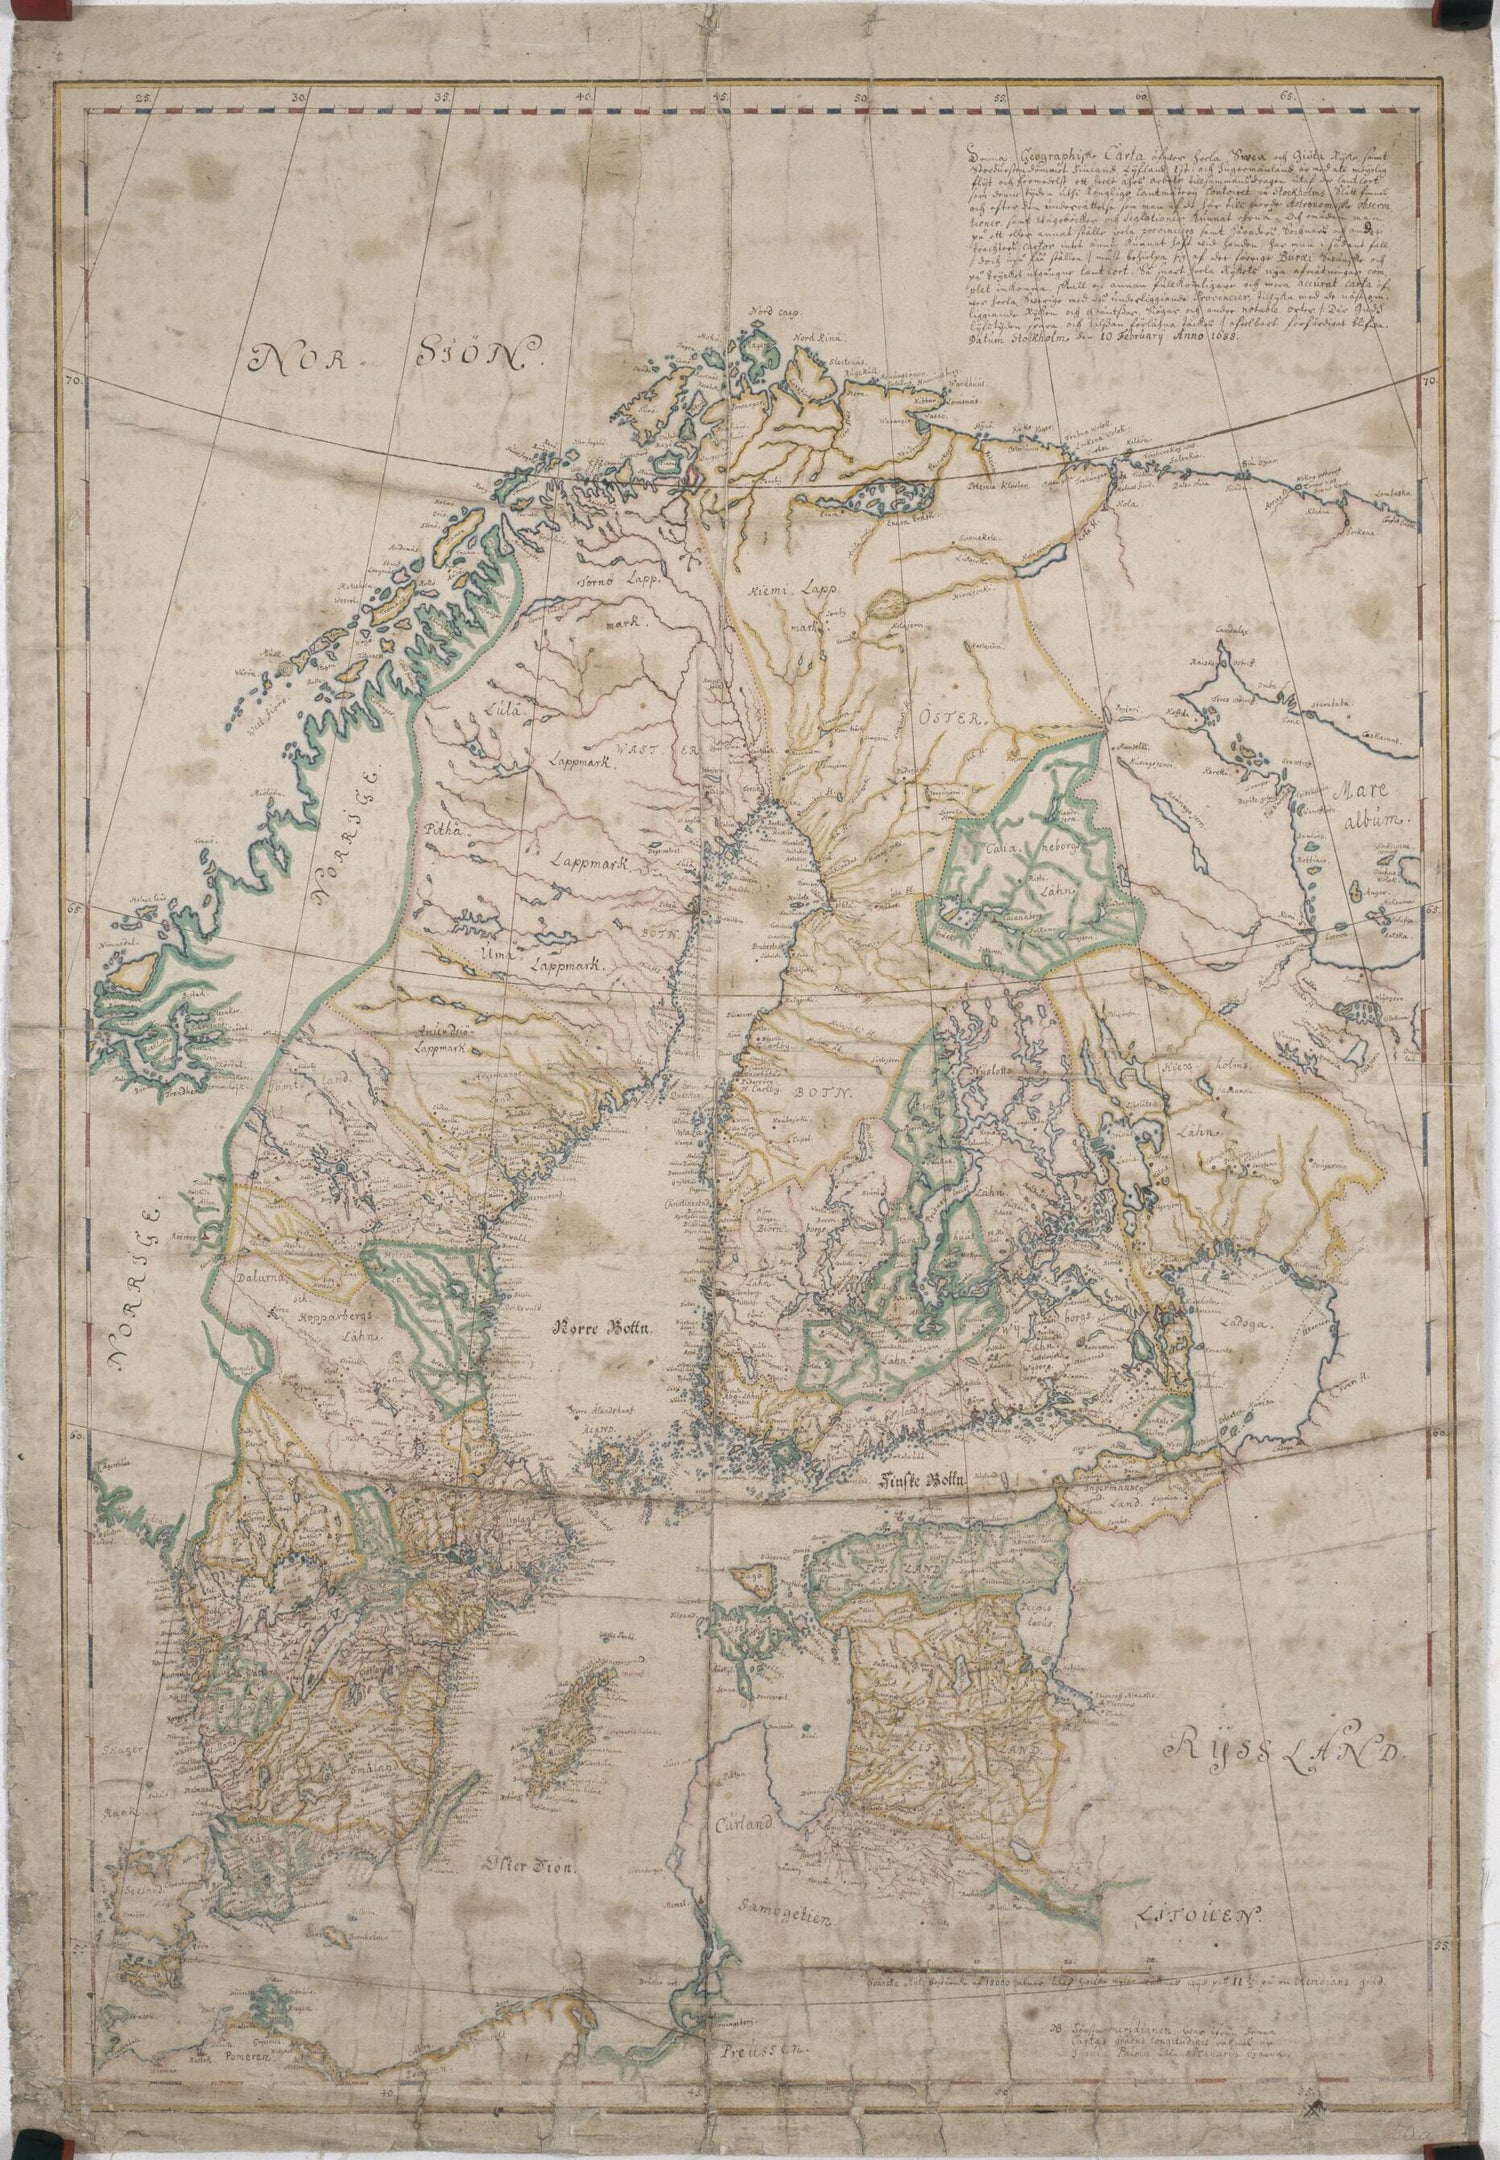 This old map of General Map of the Swedish Kingdom. (Generalkarta över Svenska Riket) from 1688 was created by Carl Gripenhielm in 1688